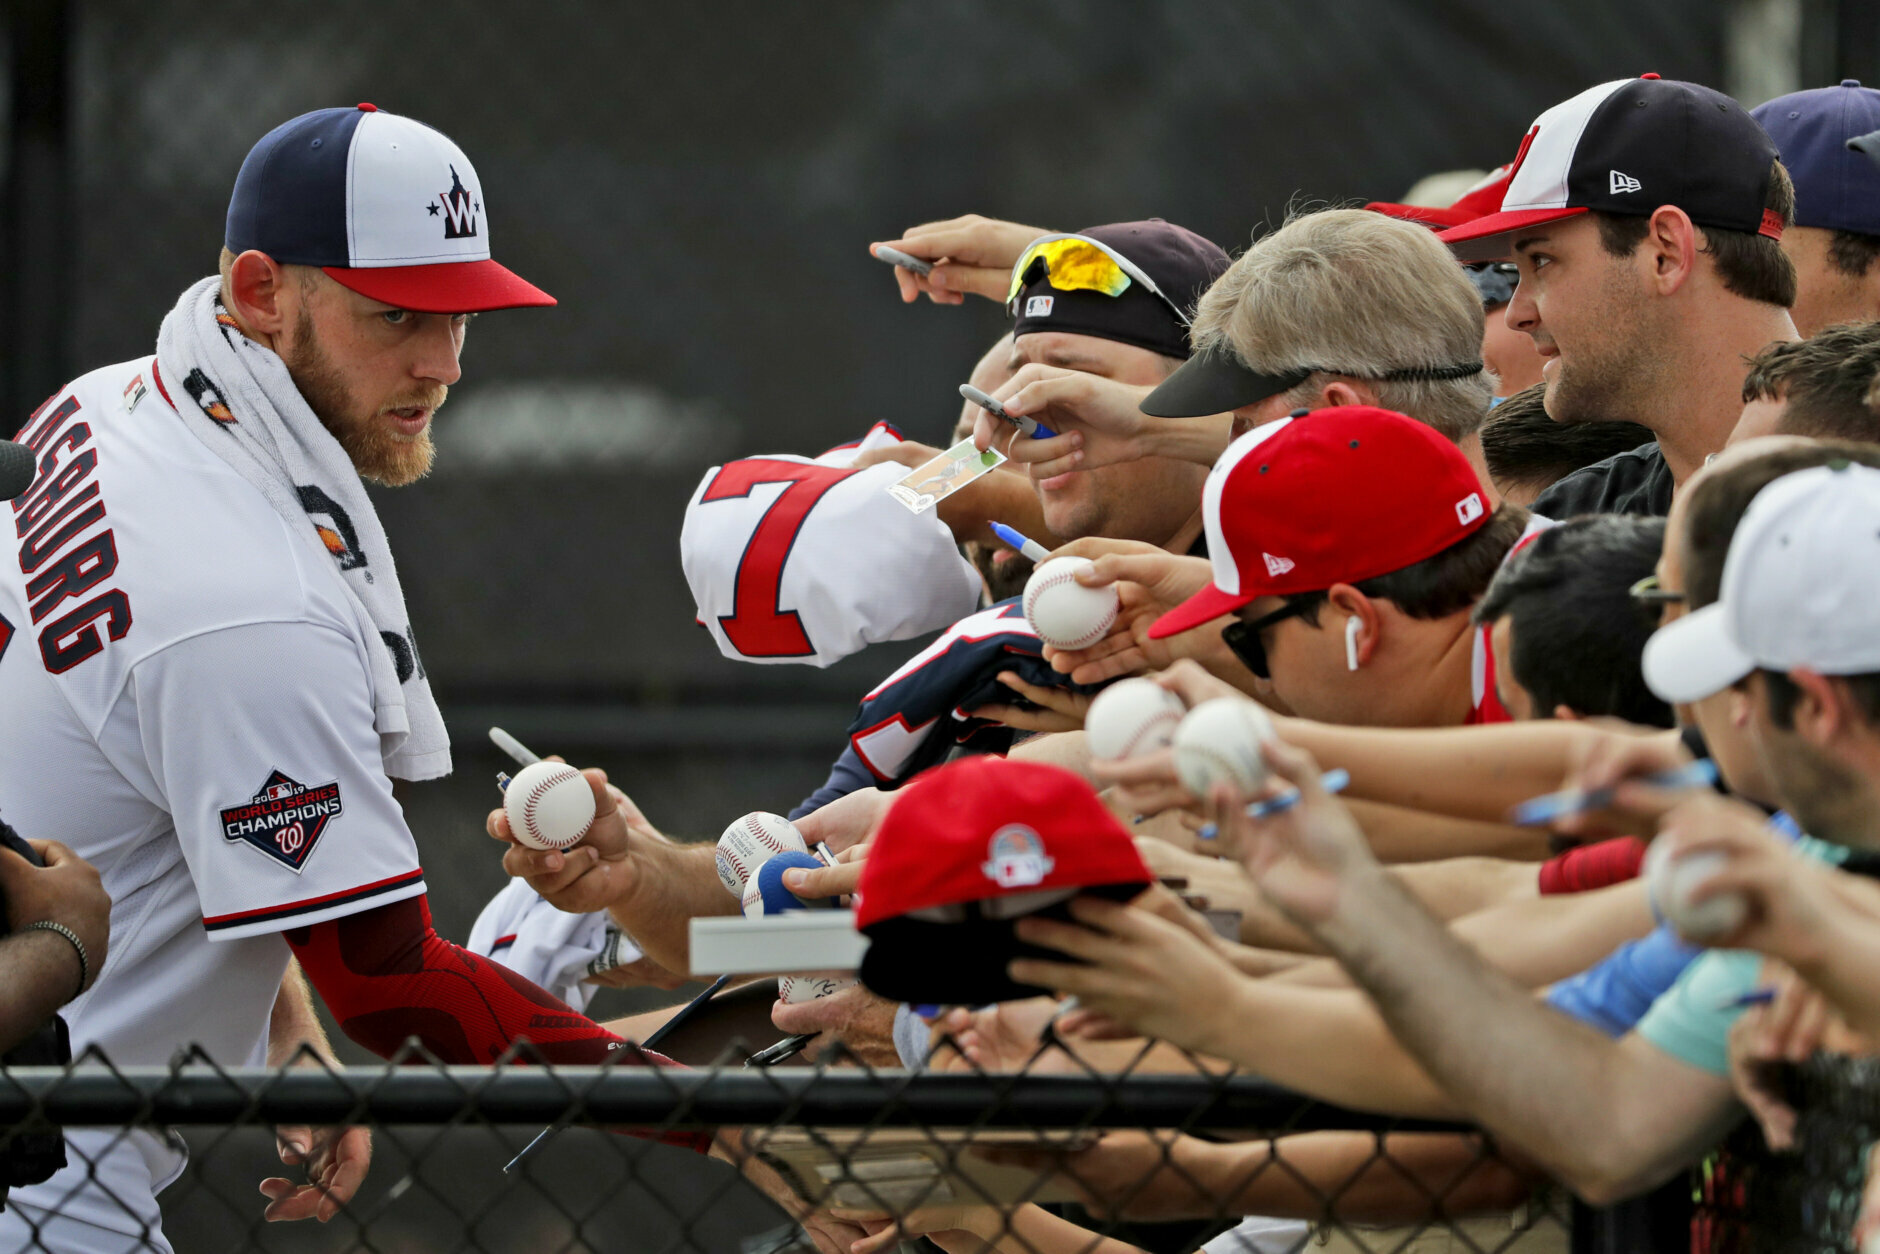 Sights from the Washington Nationals’ spring training camp WTOP News